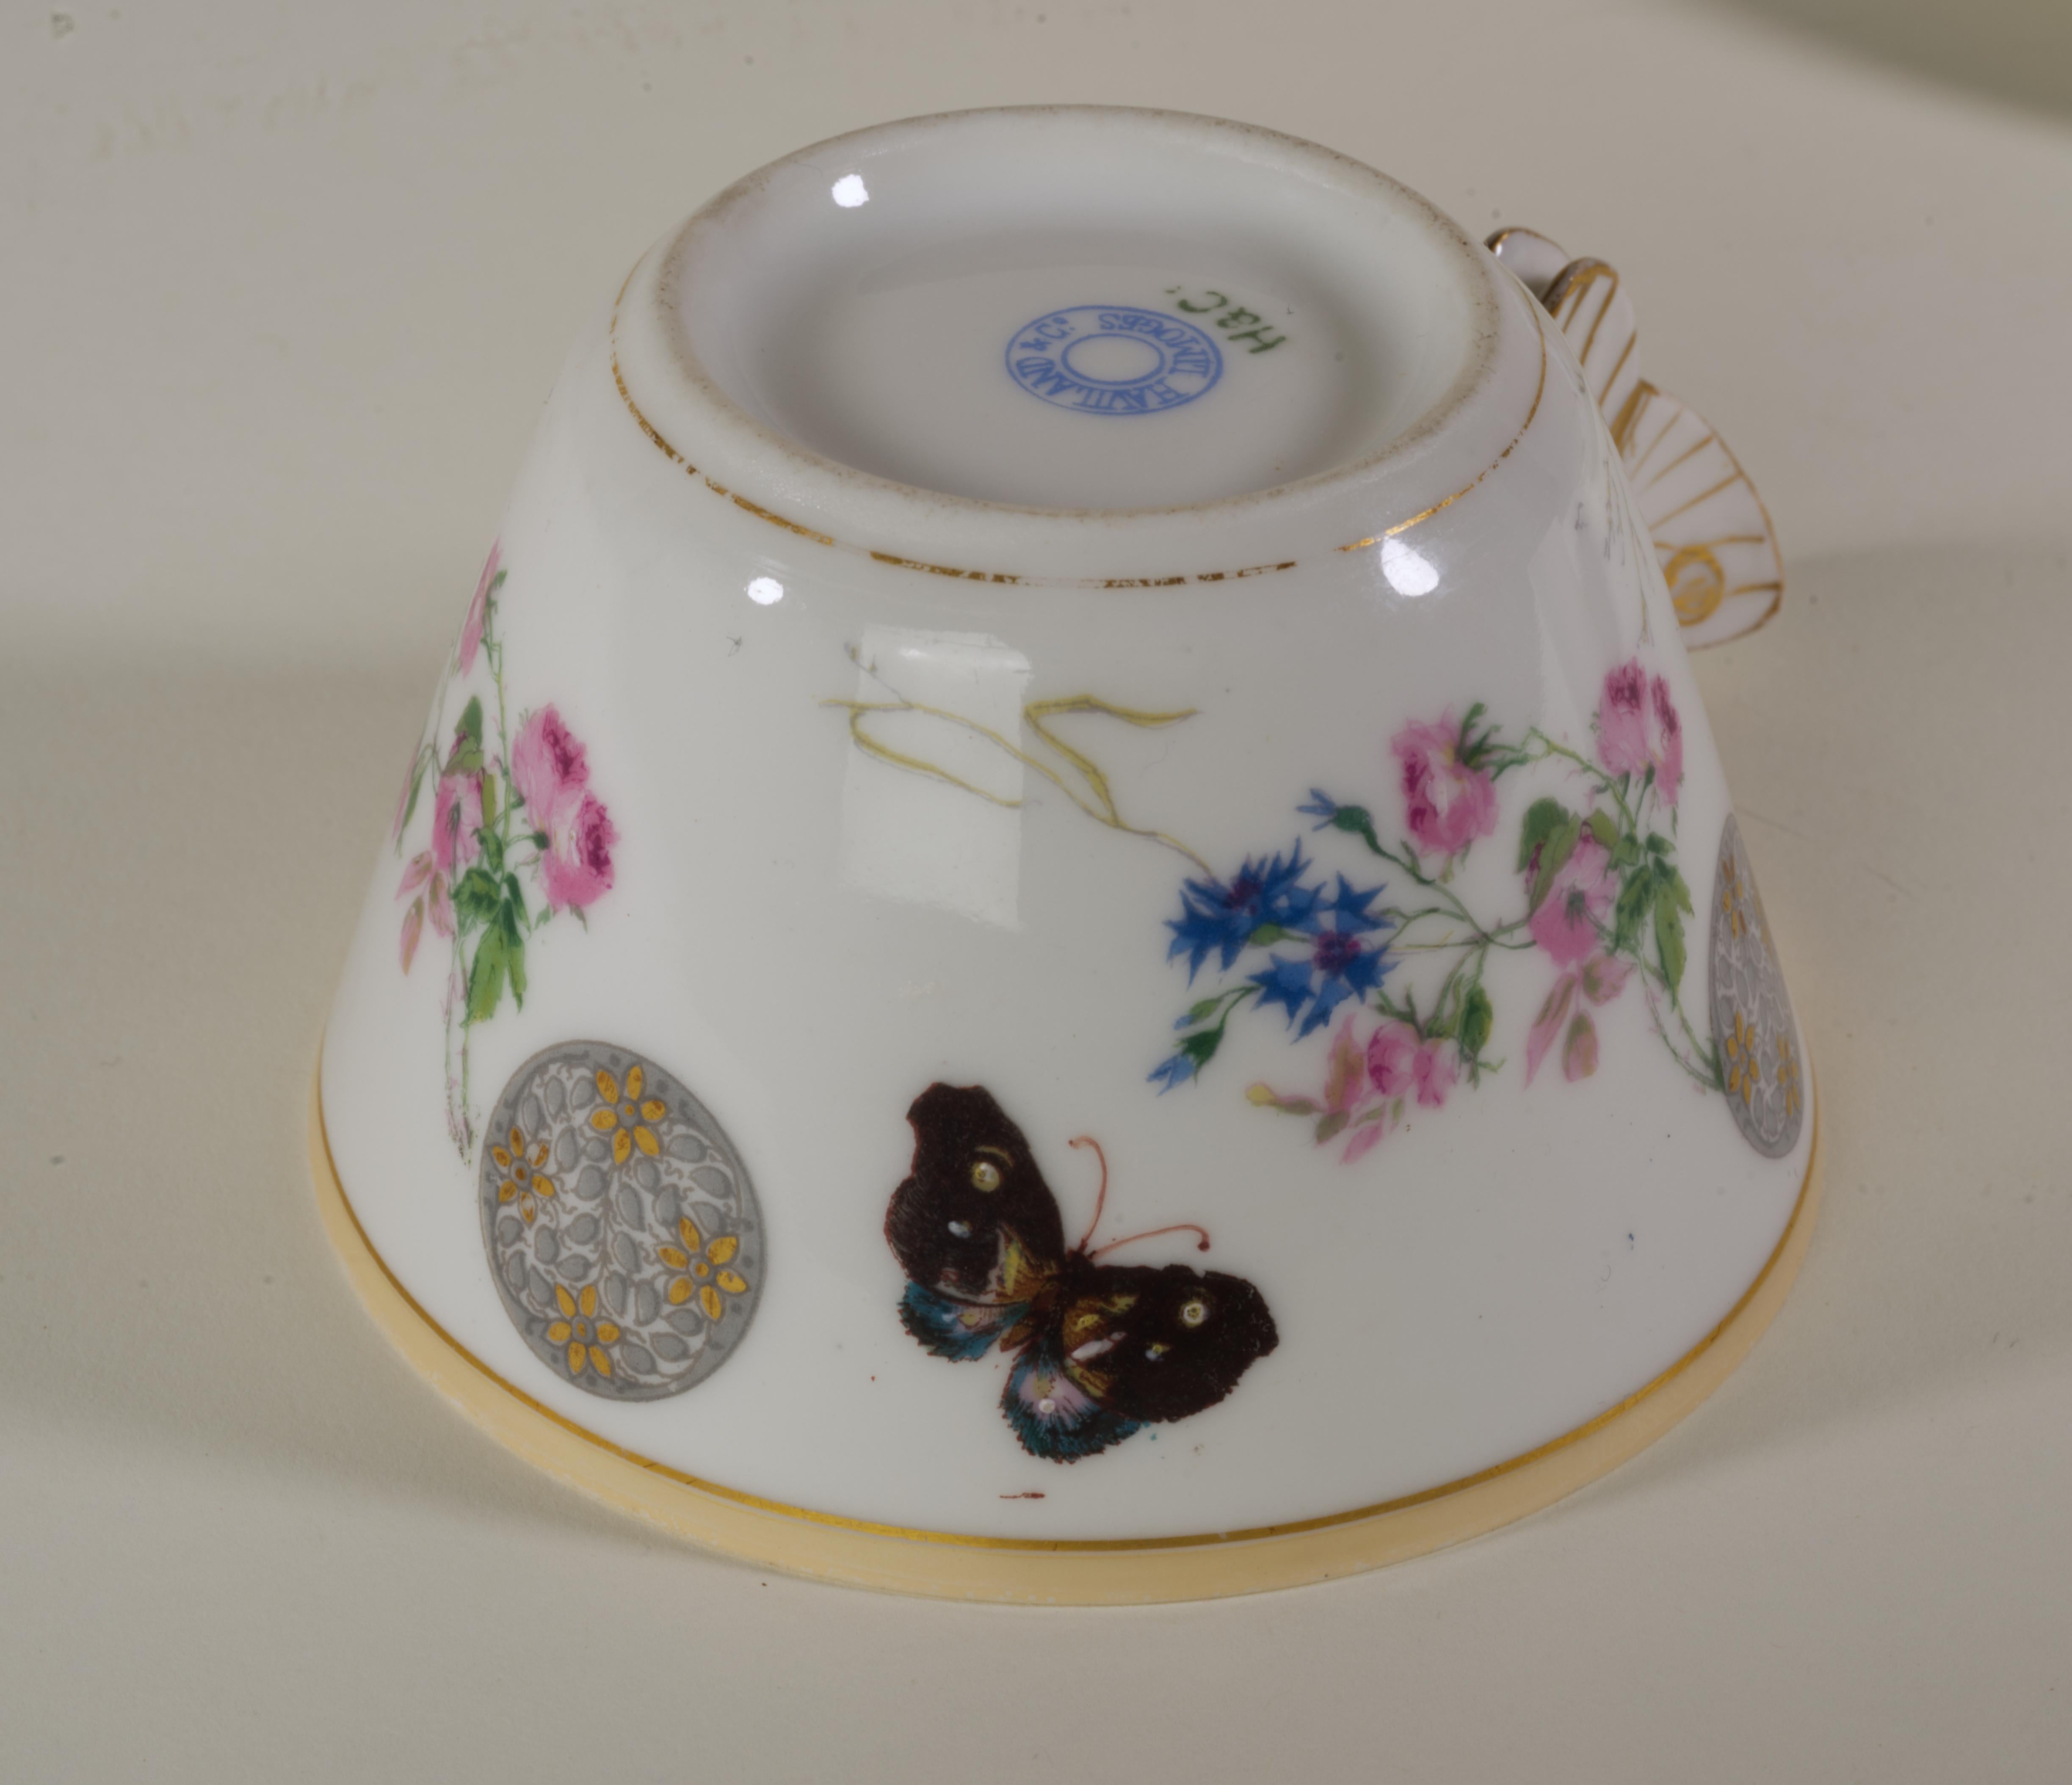 Haviland Limoges Butterfly Handled Cup and saucer set, 1879-1889, Aesthetic  For Sale 6